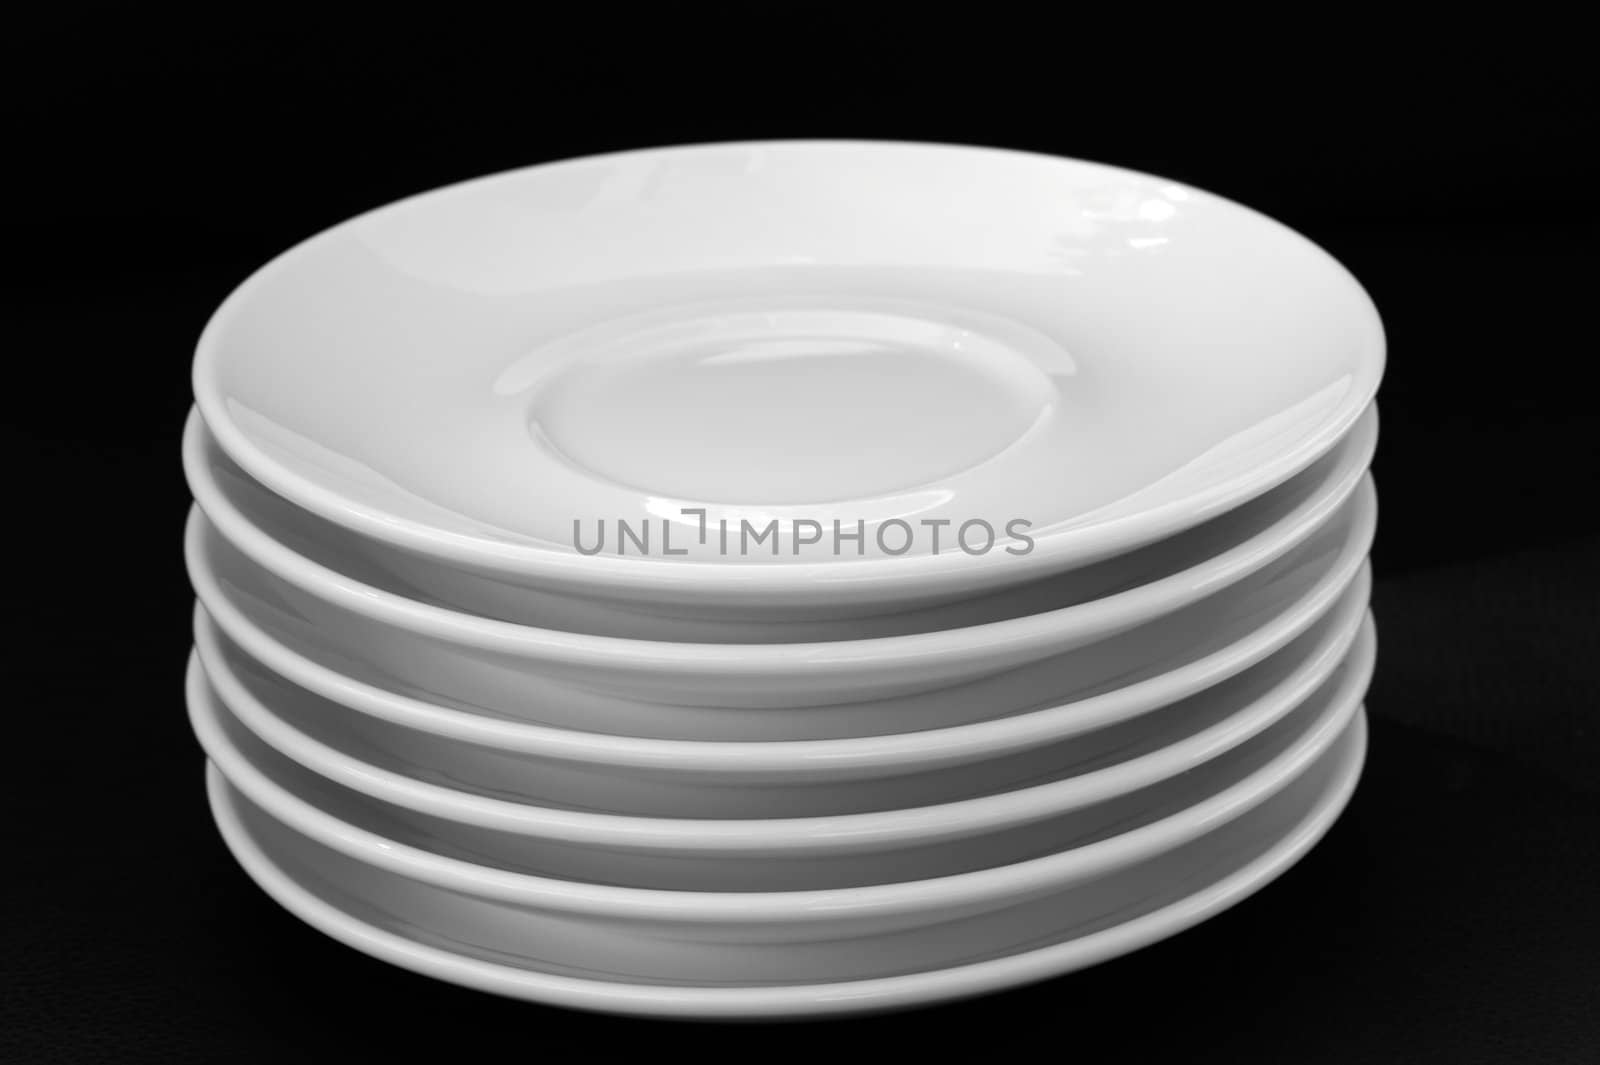 White plates by Roberti1981